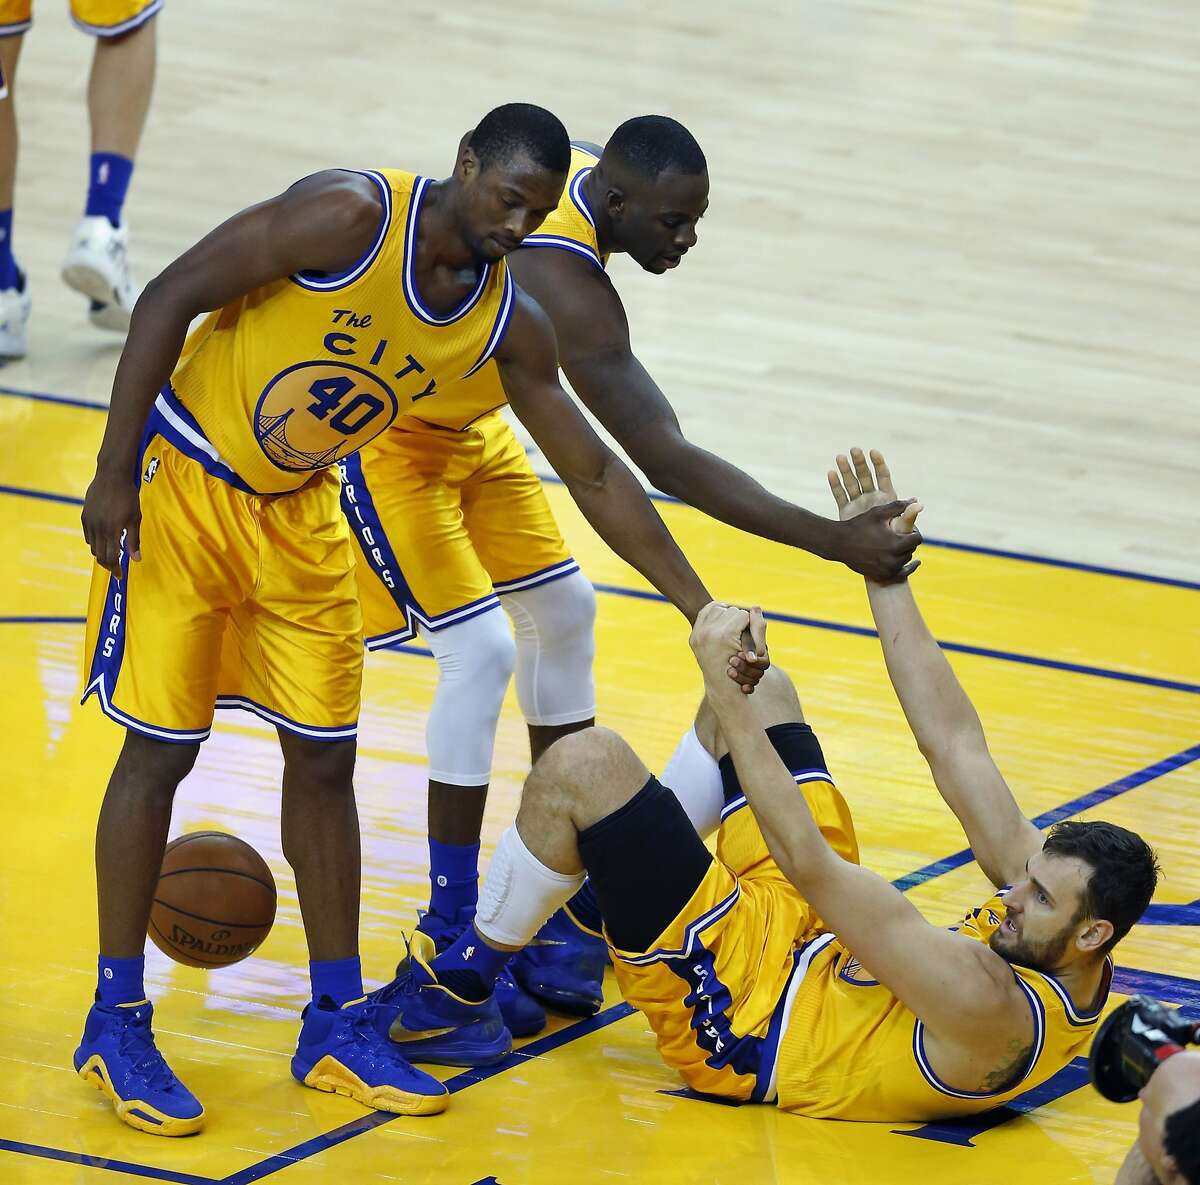 Golden State Warriors' Andrew Bogut is helped up by Harrison Barnes and Draymond Green in 3rd quarter against Los Angeles Lakers during NBA game at Oracle Arena in Oakland, Calif., on Tuesday, November 24, 2015.